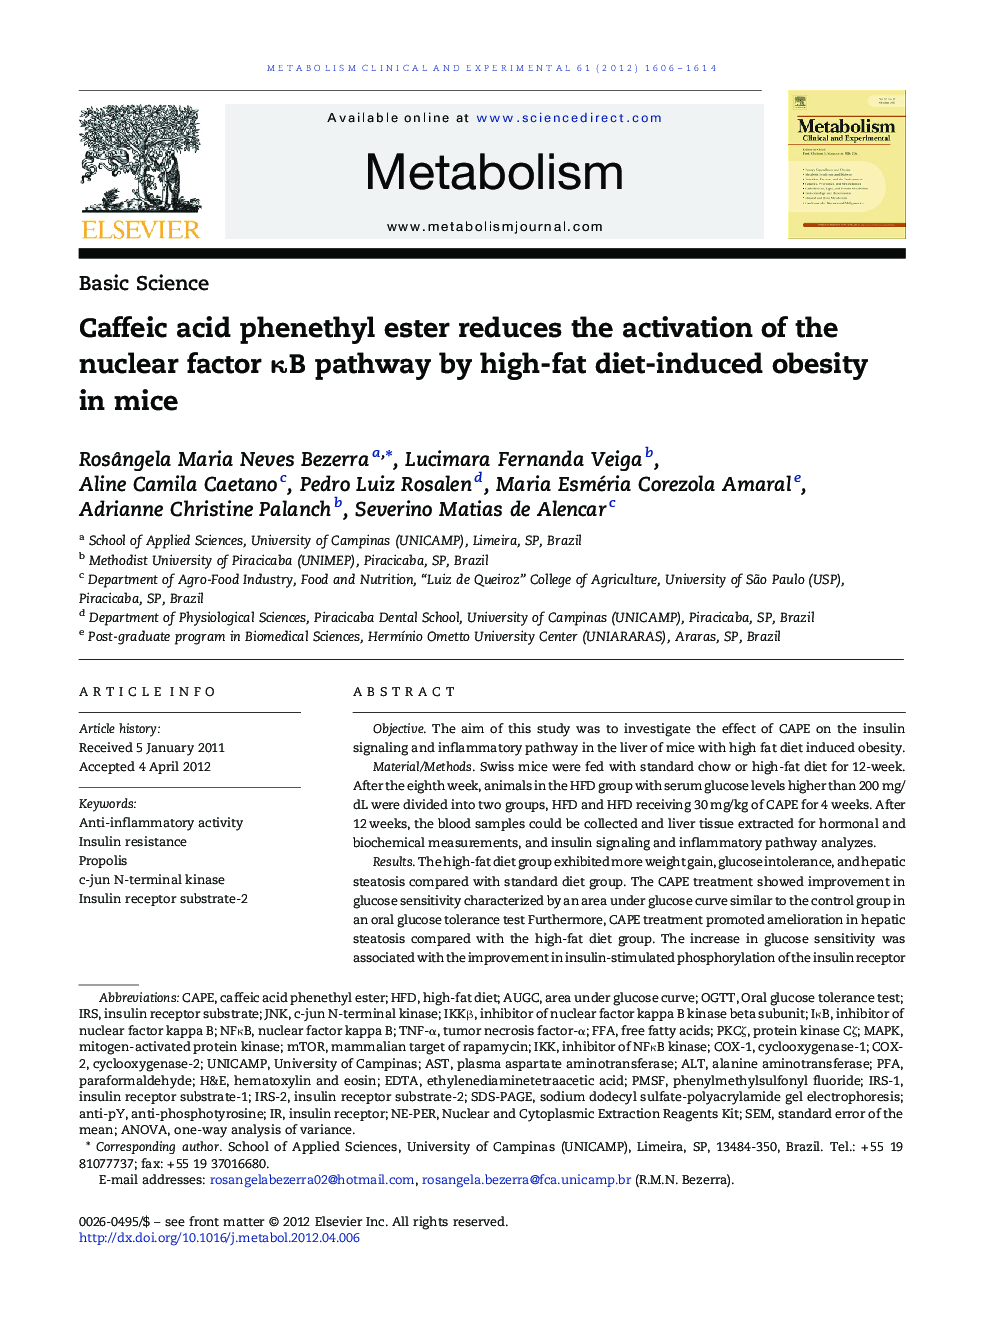 Caffeic acid phenethyl ester reduces the activation of the nuclear factor ÎºB pathway by high-fat diet-induced obesity in mice